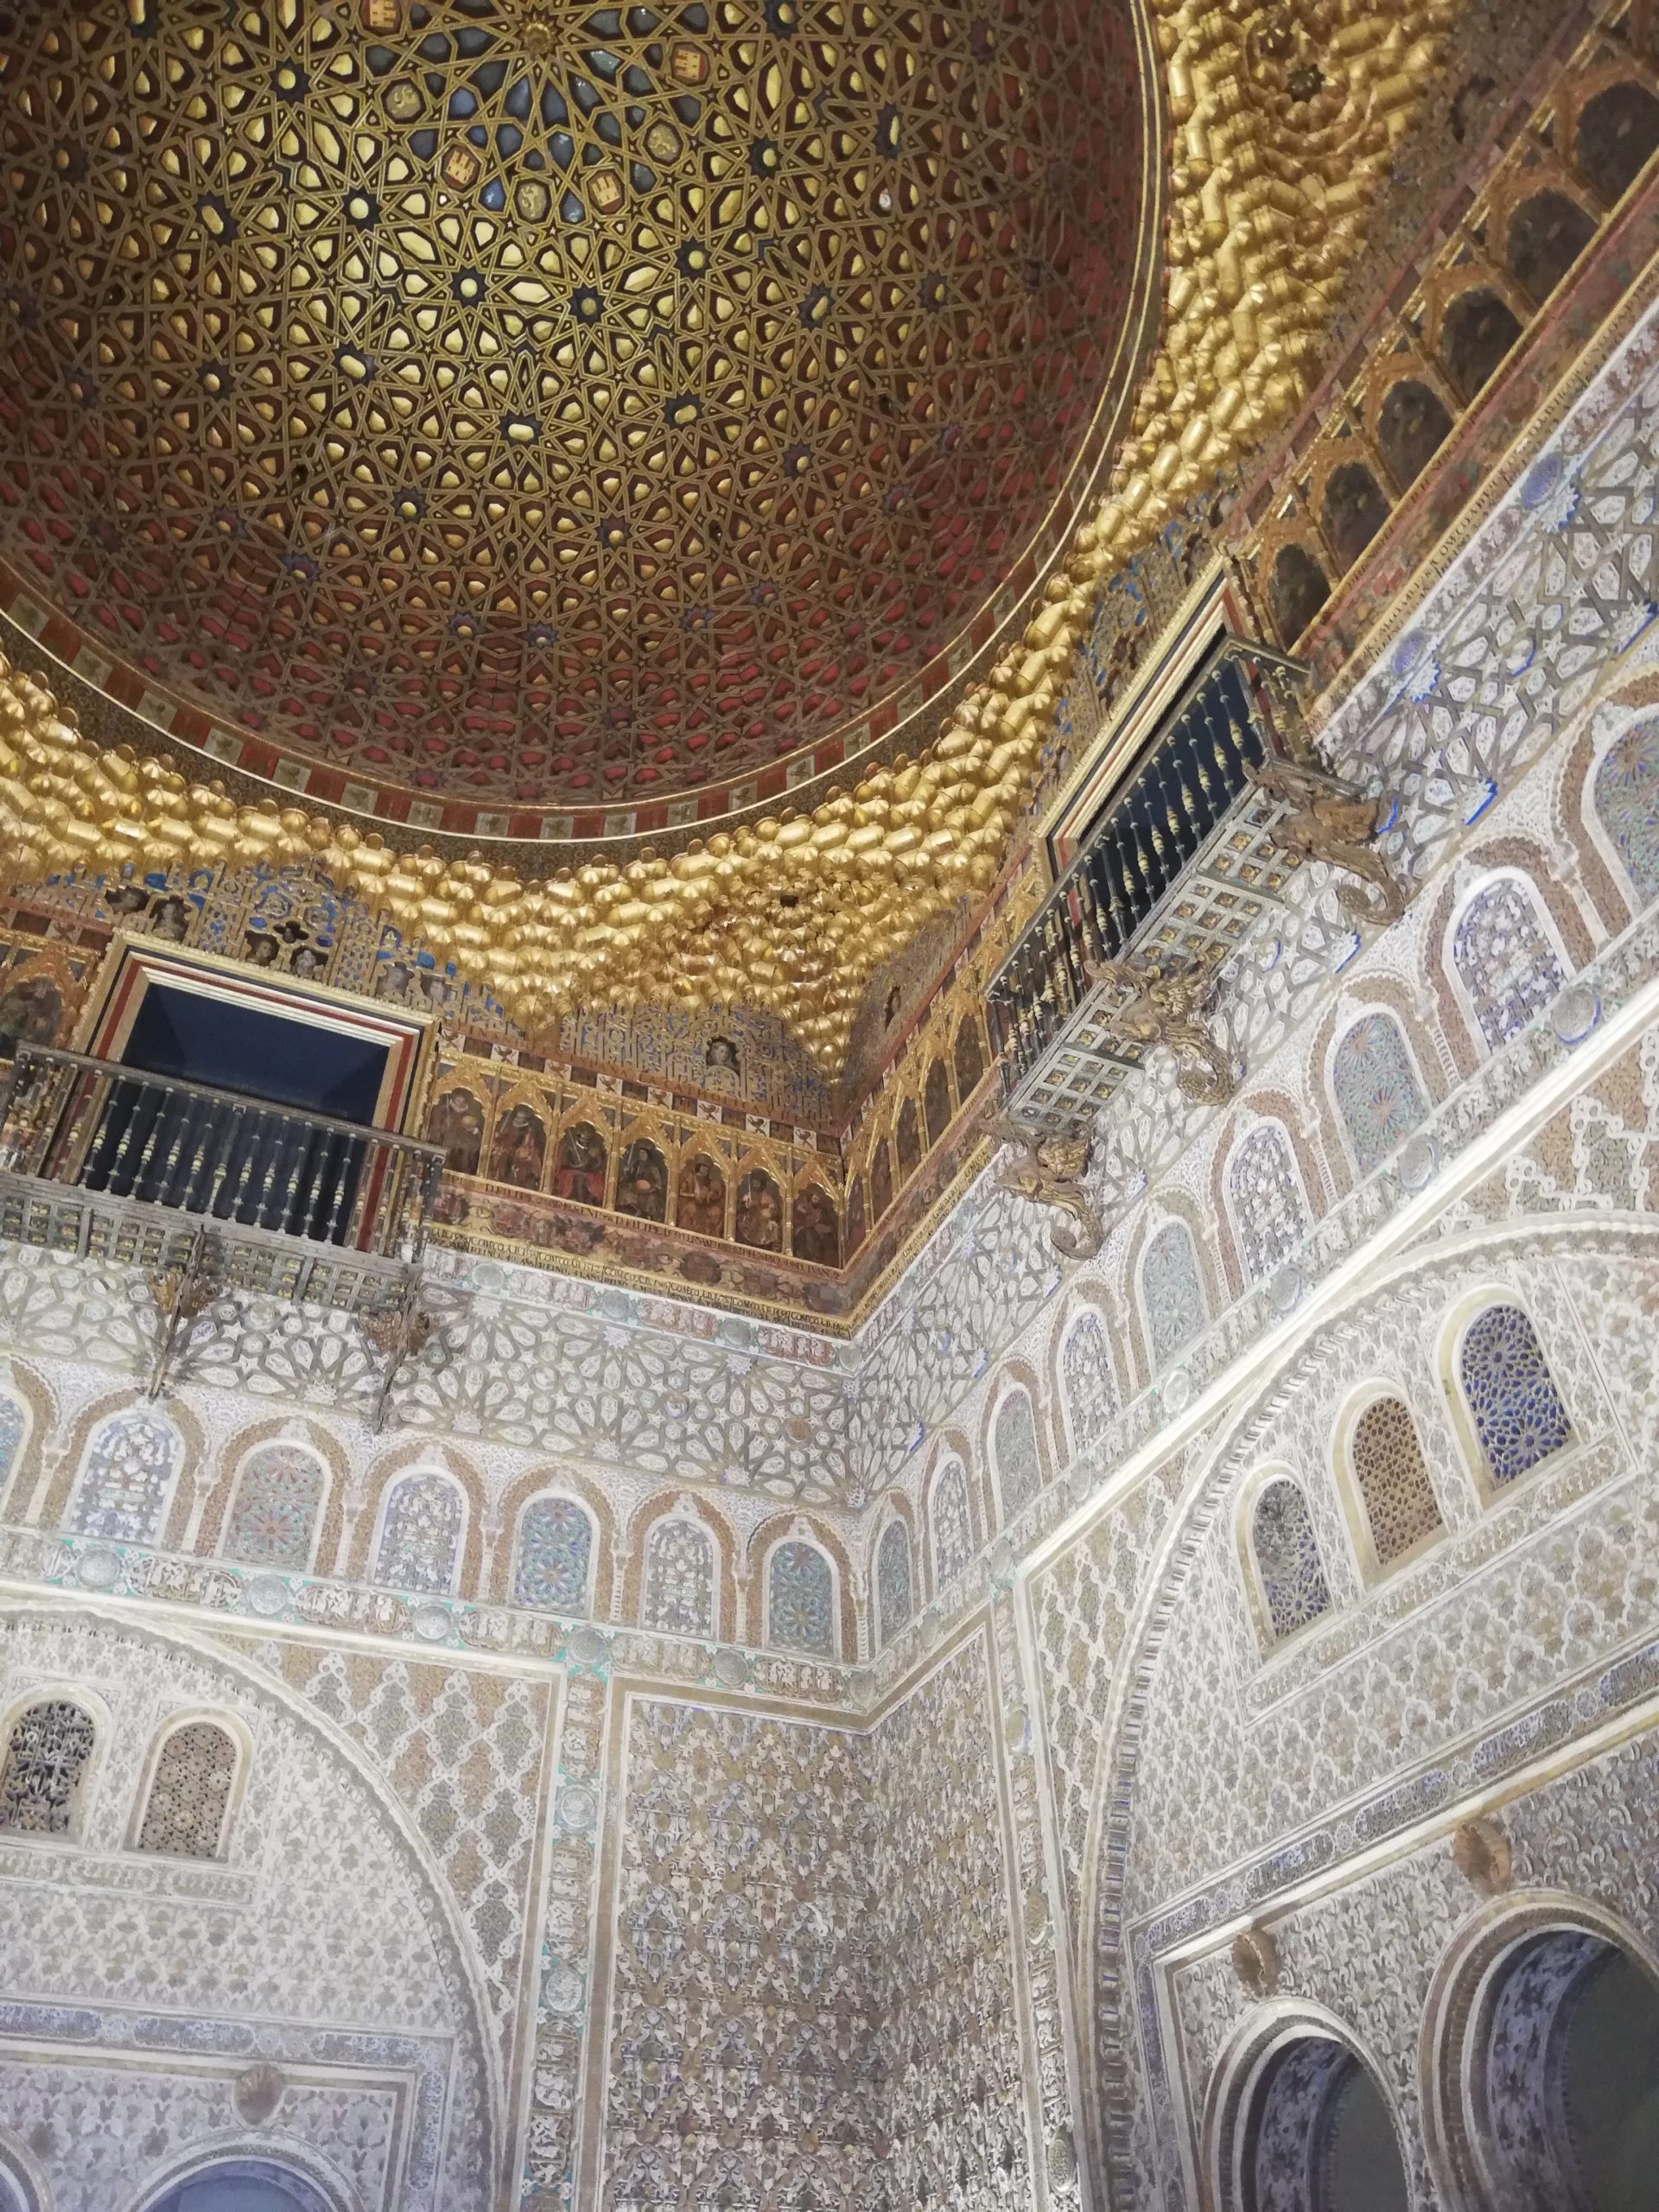 Impressions of our visit to the Alcázar of Seville.